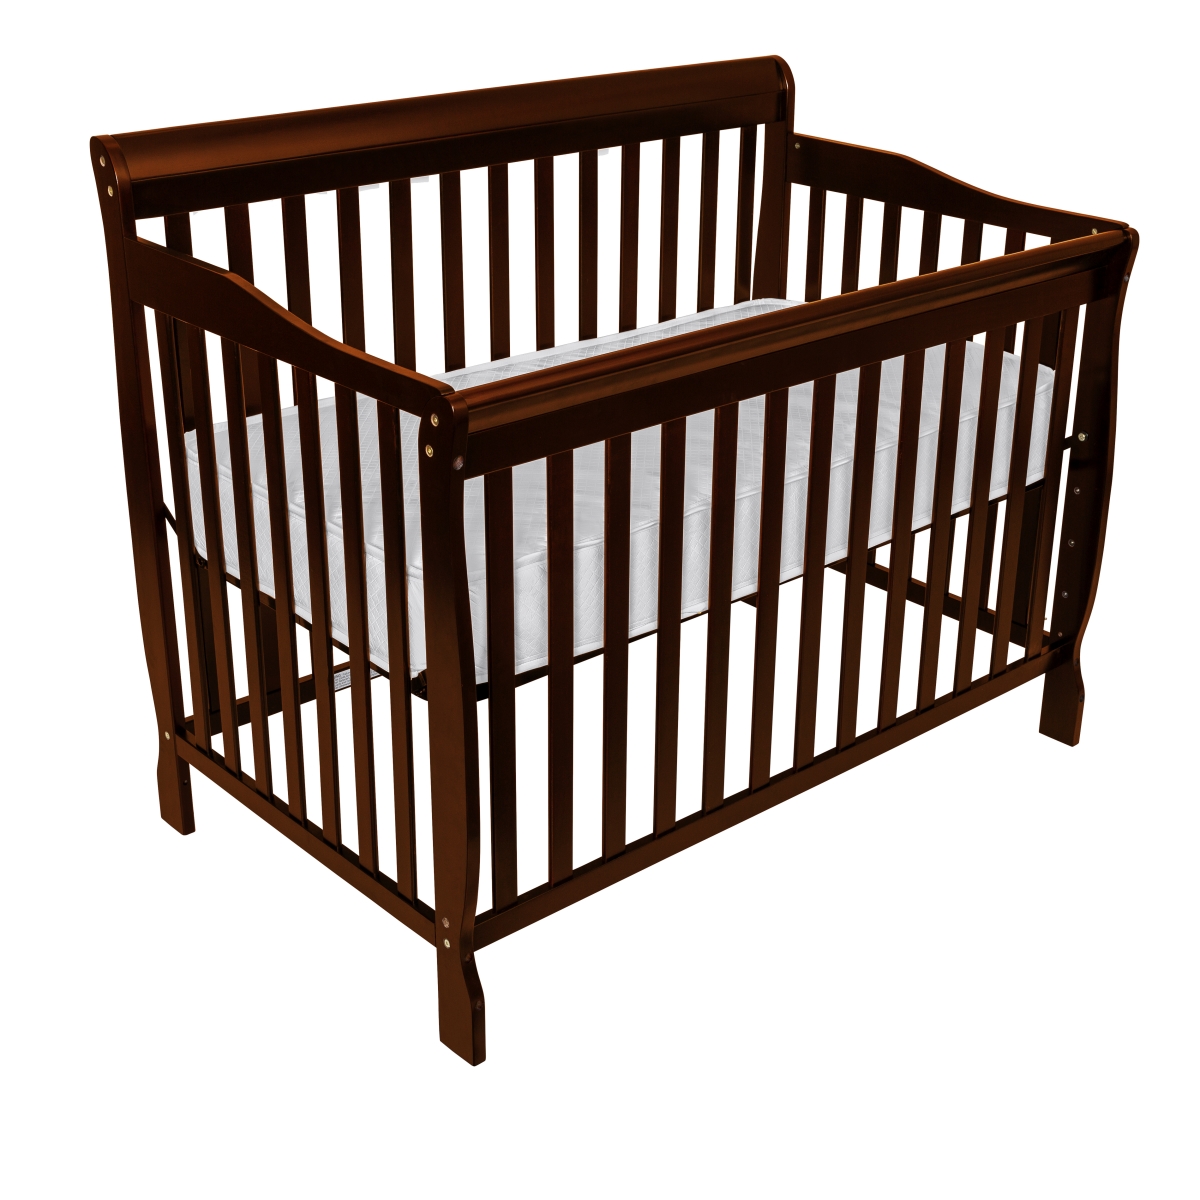 925-c 925 Full Size 4 In 1 Crib 3 Positions - Cherry